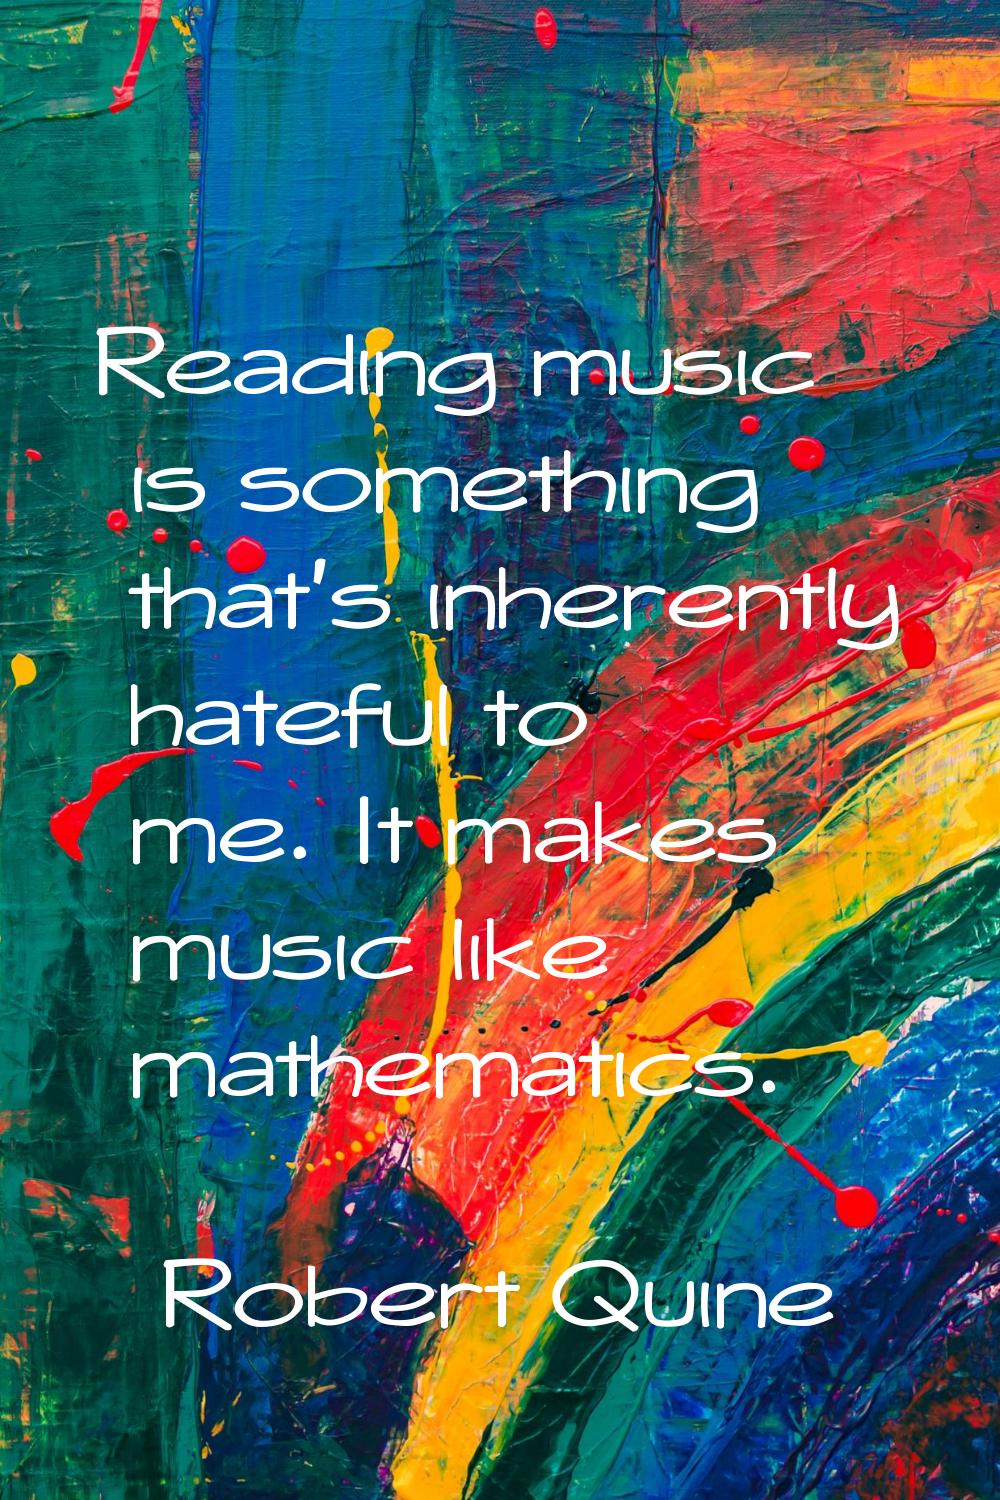 Reading music is something that's inherently hateful to me. It makes music like mathematics.